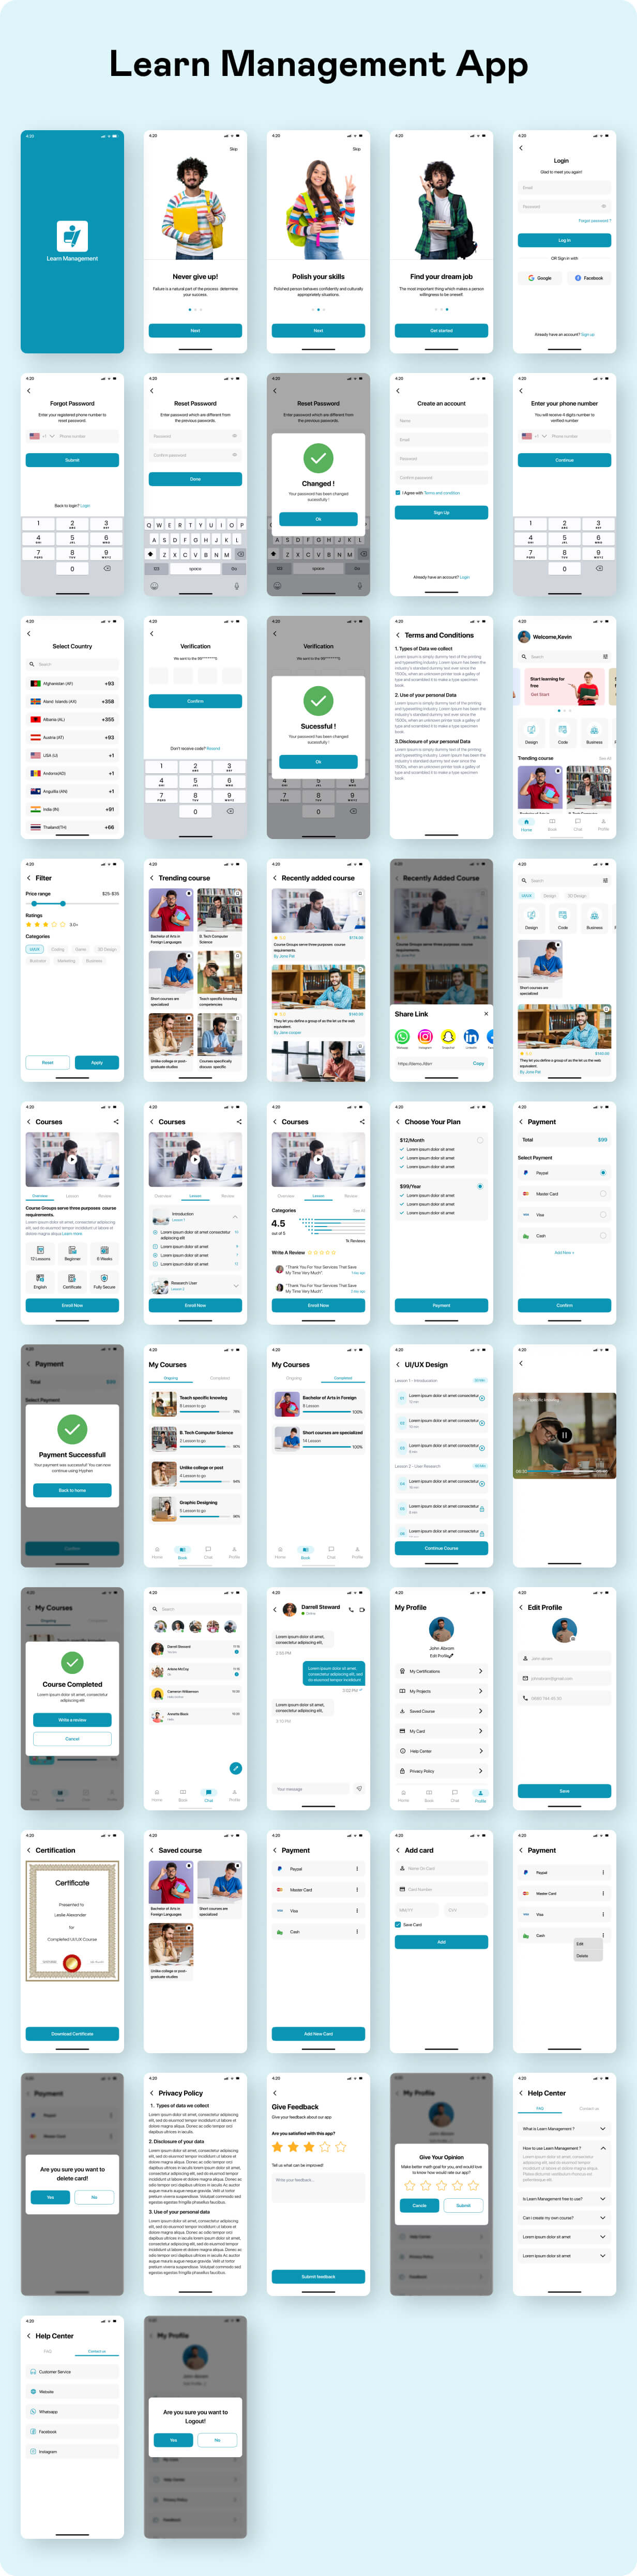 StudySync UI template | LearnManagement App in Flutter | Learn Career Skills App Template - 16